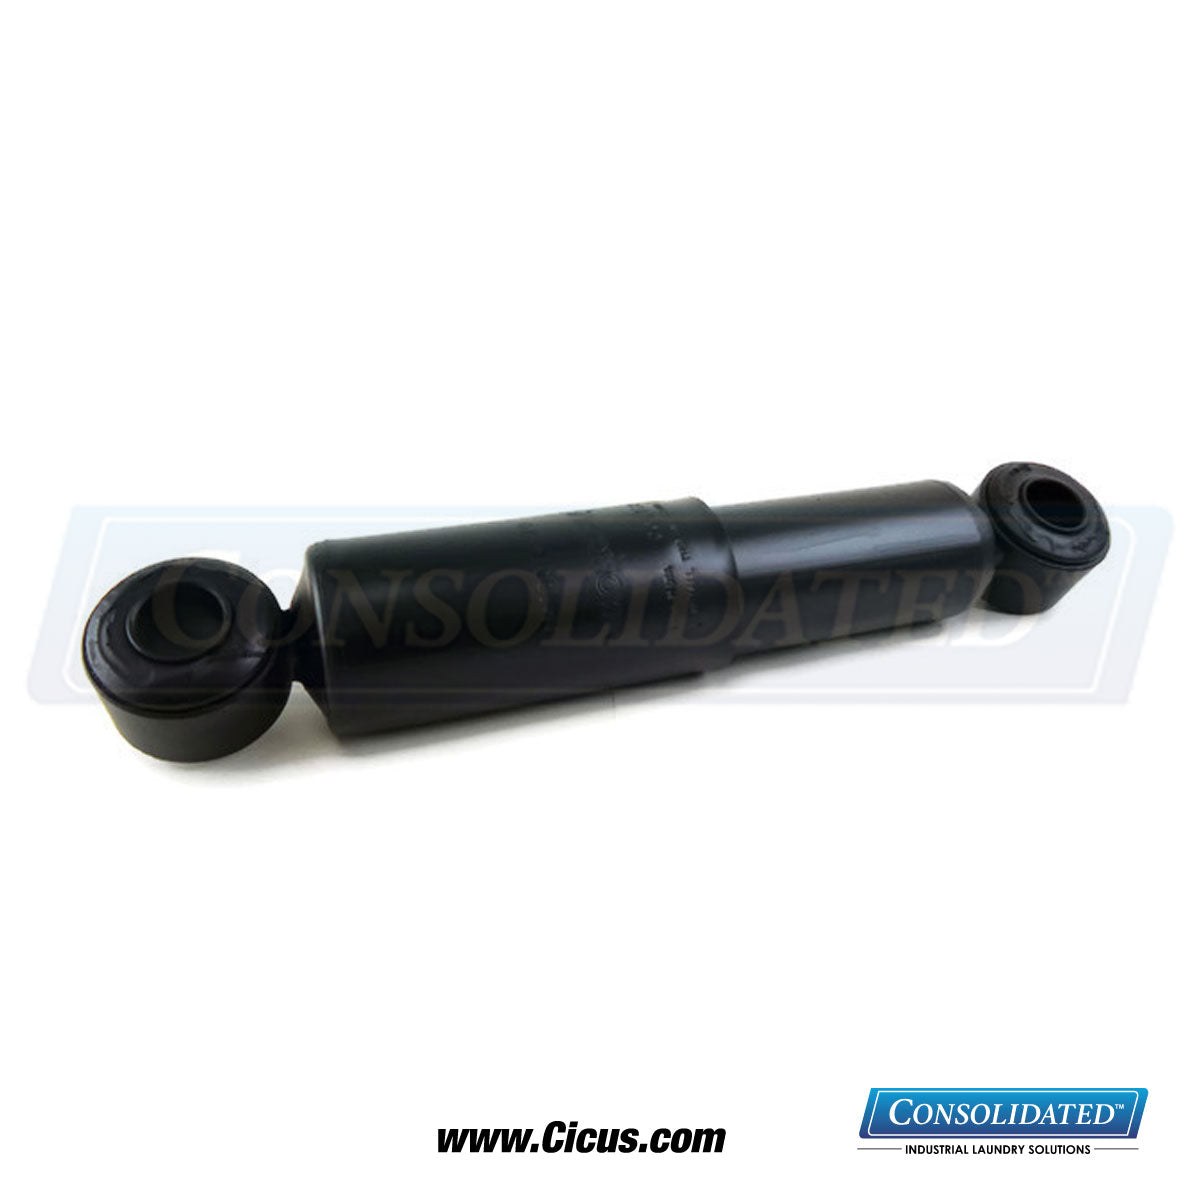 Washex Shock Absorber 1 3/4 X 5 (Replaces P/N 266401) [266421] - Front Side View